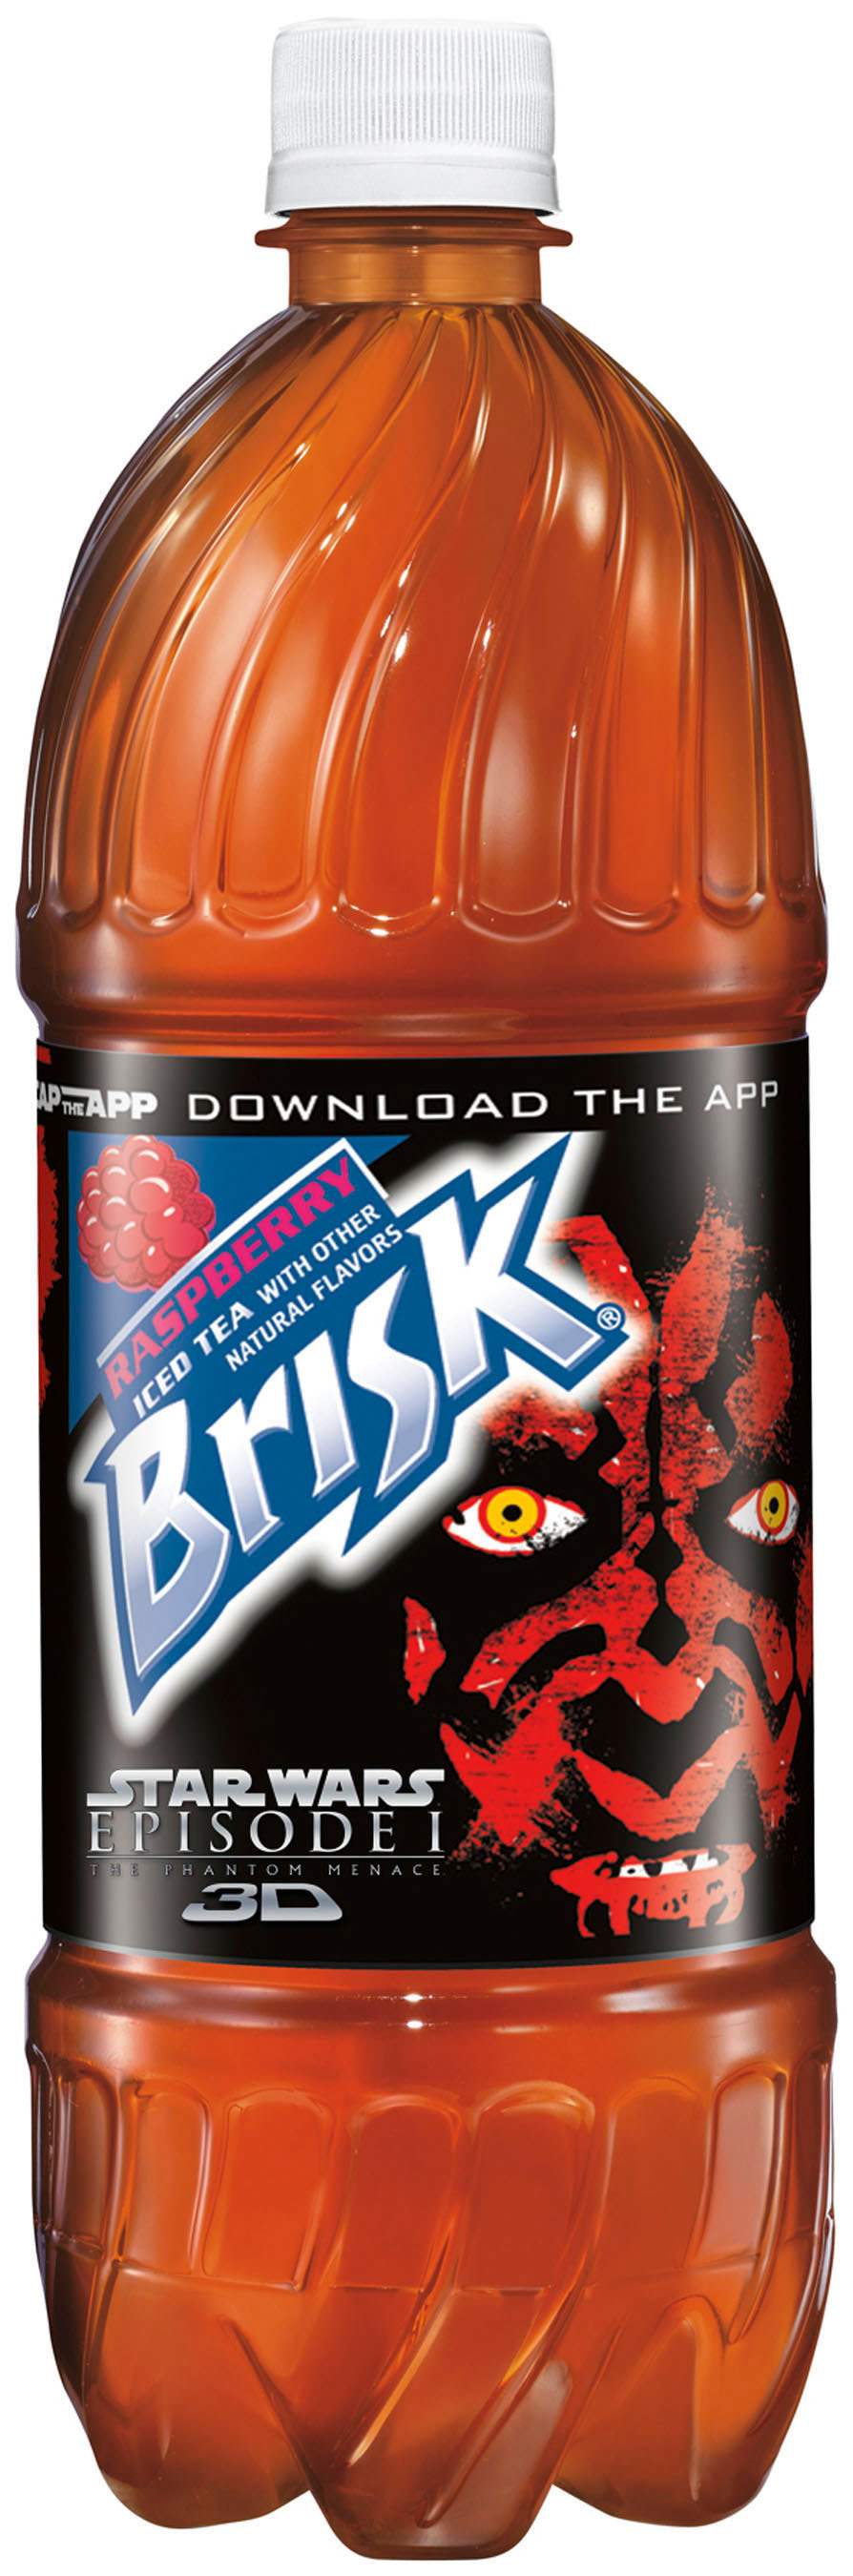 Brisk® Iced Tea Infuses its Bold Flavor Into Two Iconic Star Wars™  Characters as They Face Off for the First Time Ever